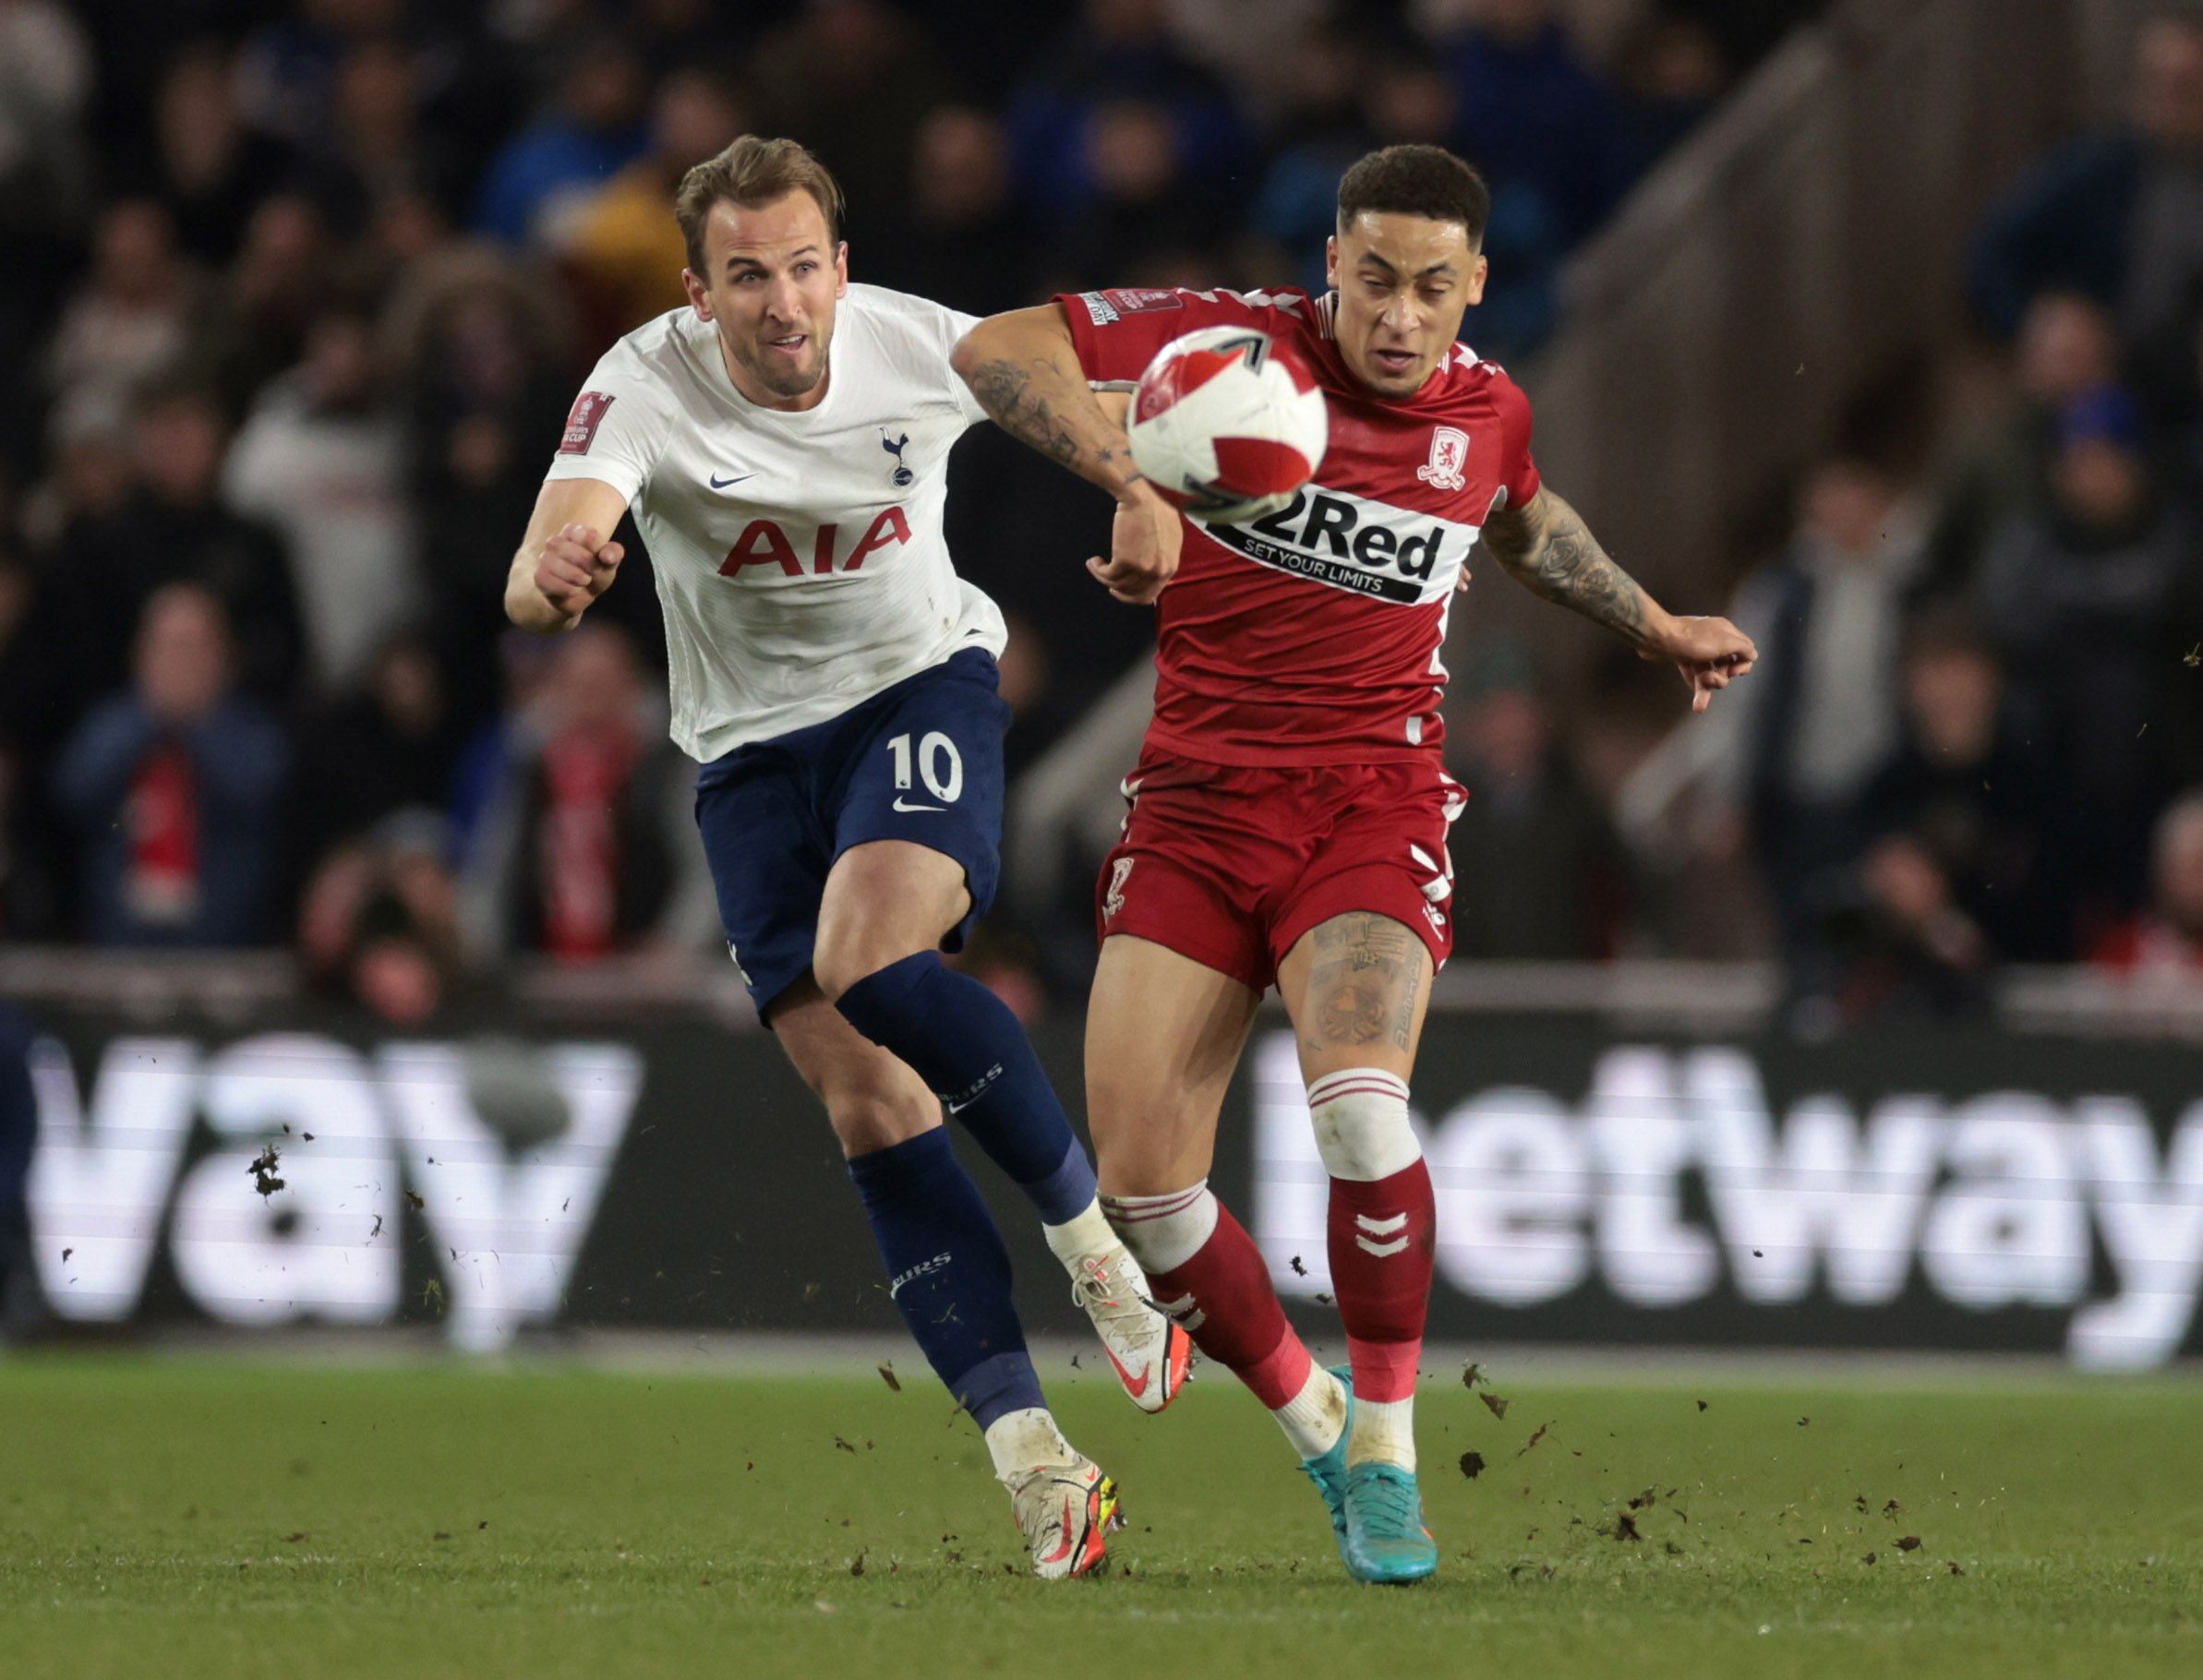 Soccer Football - FA Cup Fifth Round - Middlesbrough v Tottenham Hotspur - Riverside Stadium, Middlesbrough, Britain - March 1, 2022 Tottenham Hotspur's Harry Kane in action with Middlesbrough's Marcus Tavernier Action Images via Reuters/Lee Smith